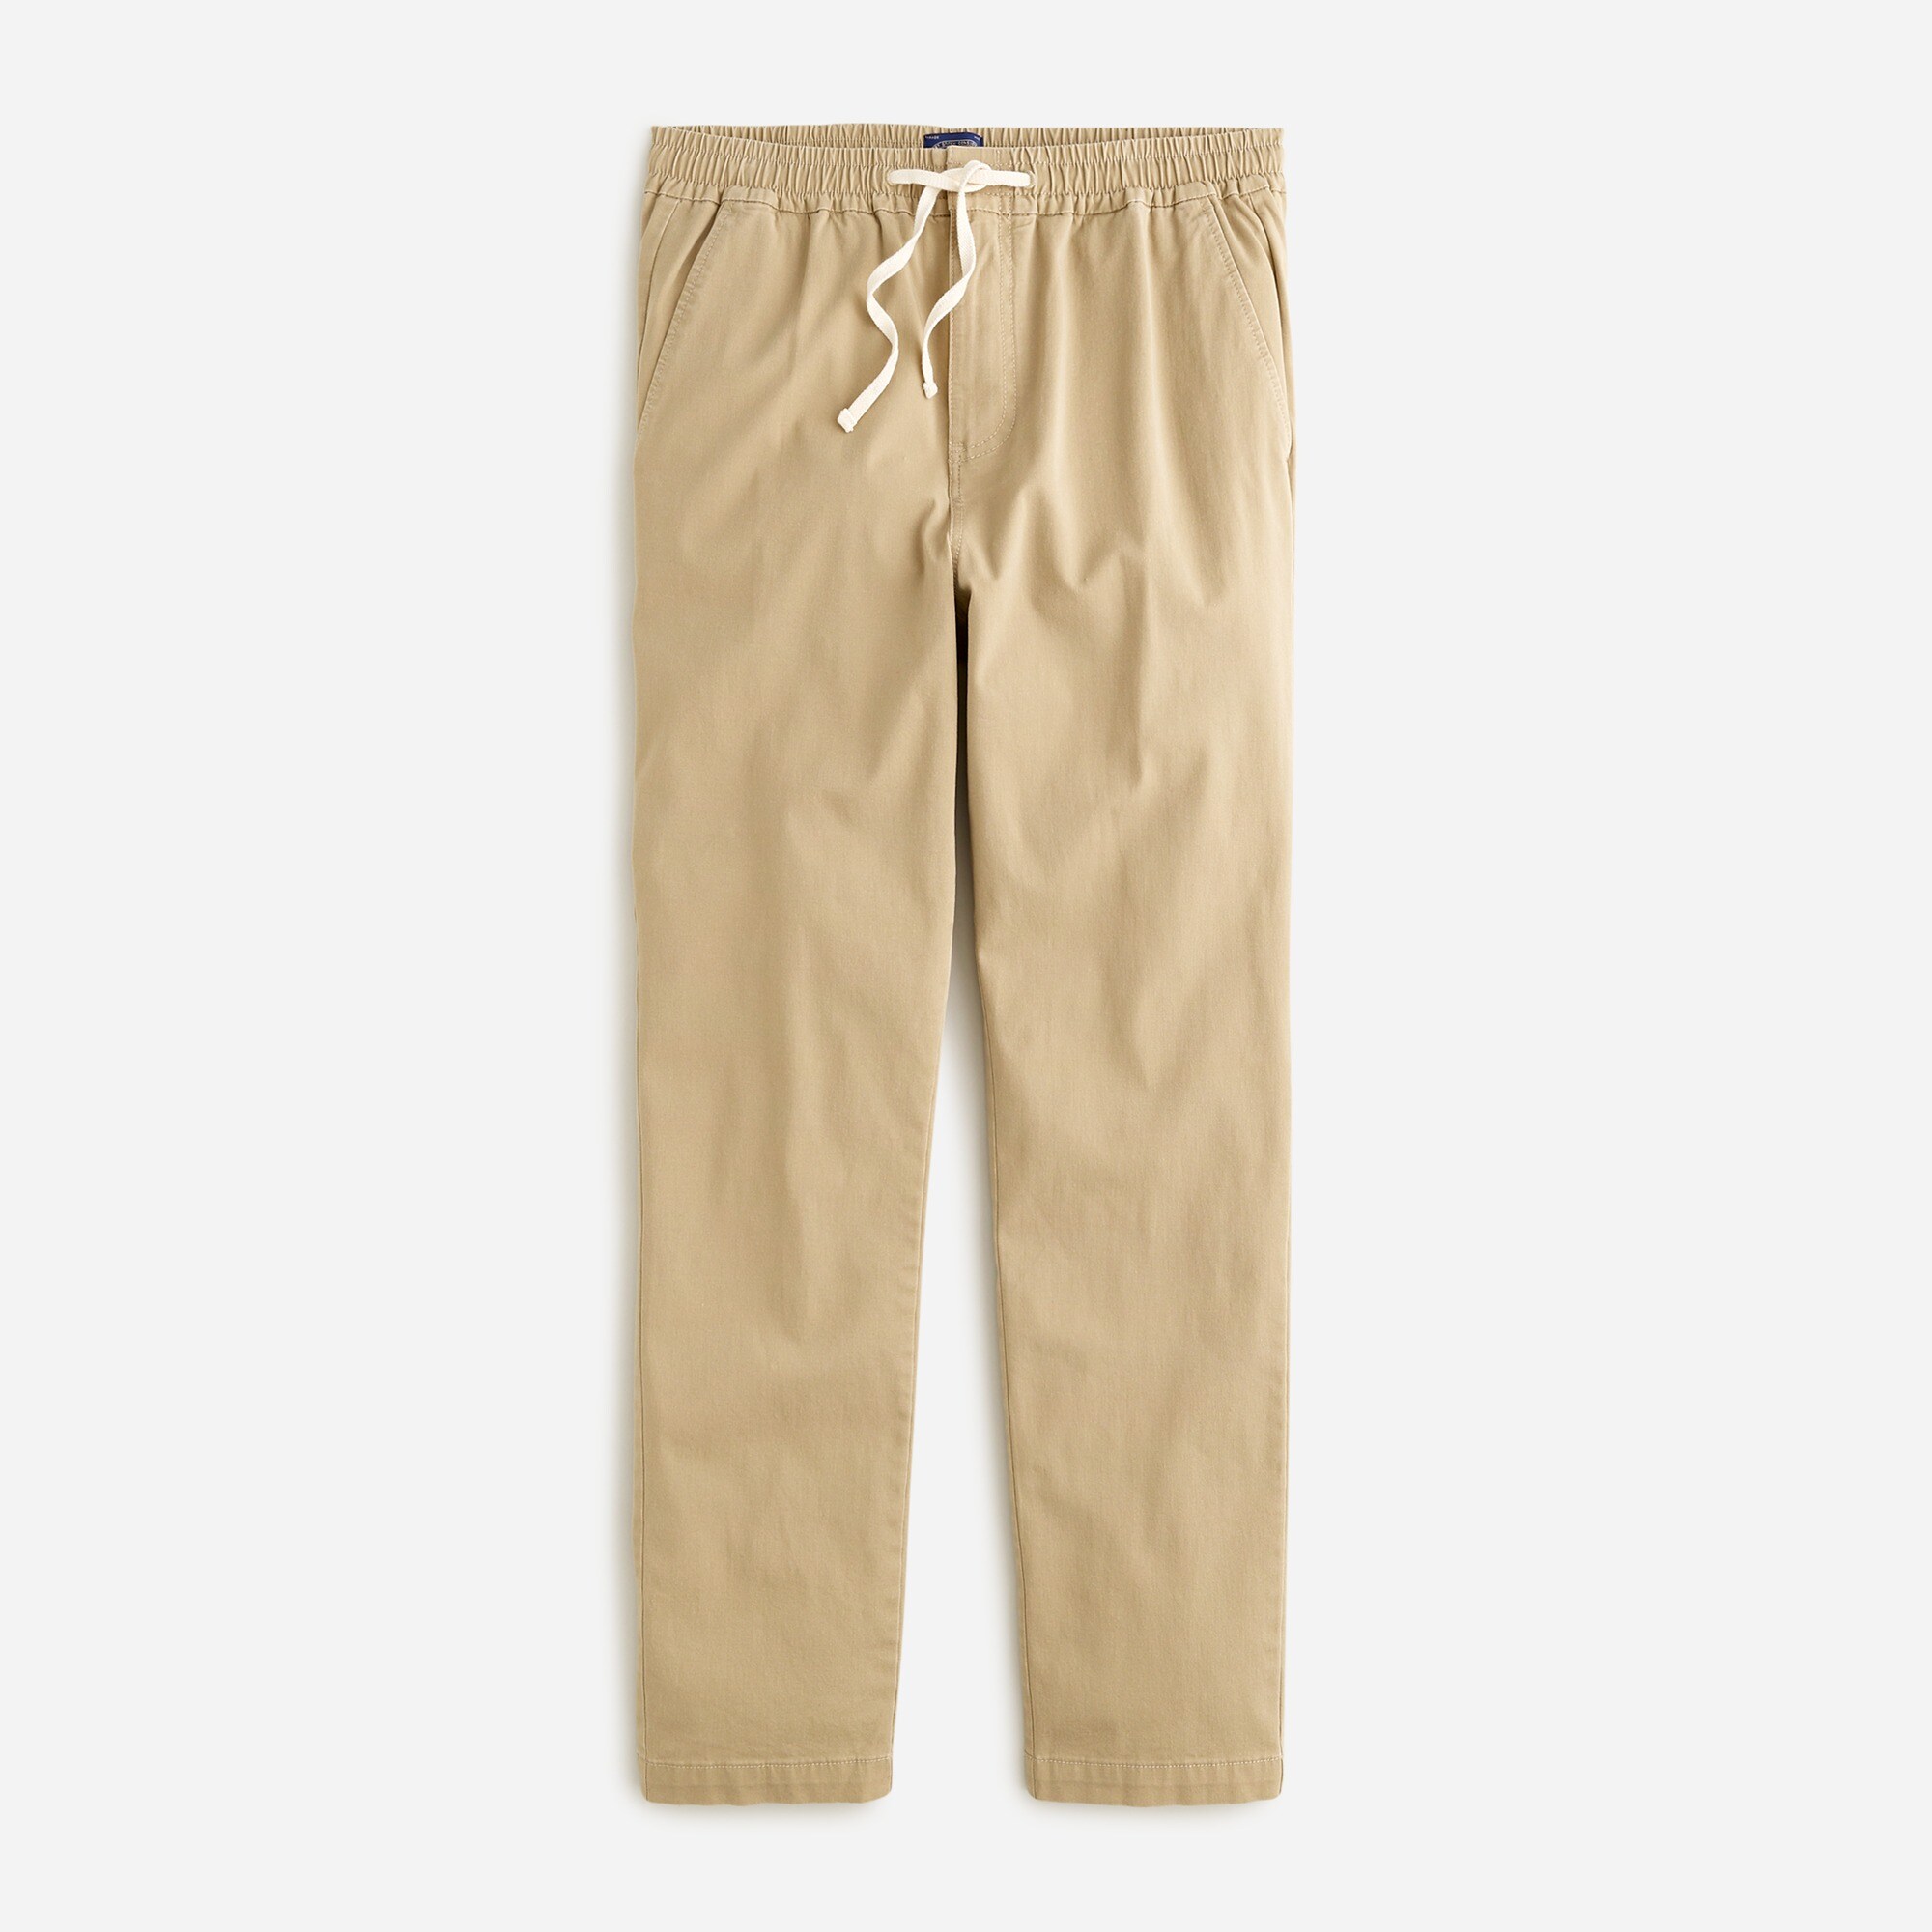  Slim dock pant in stretch cotton blend